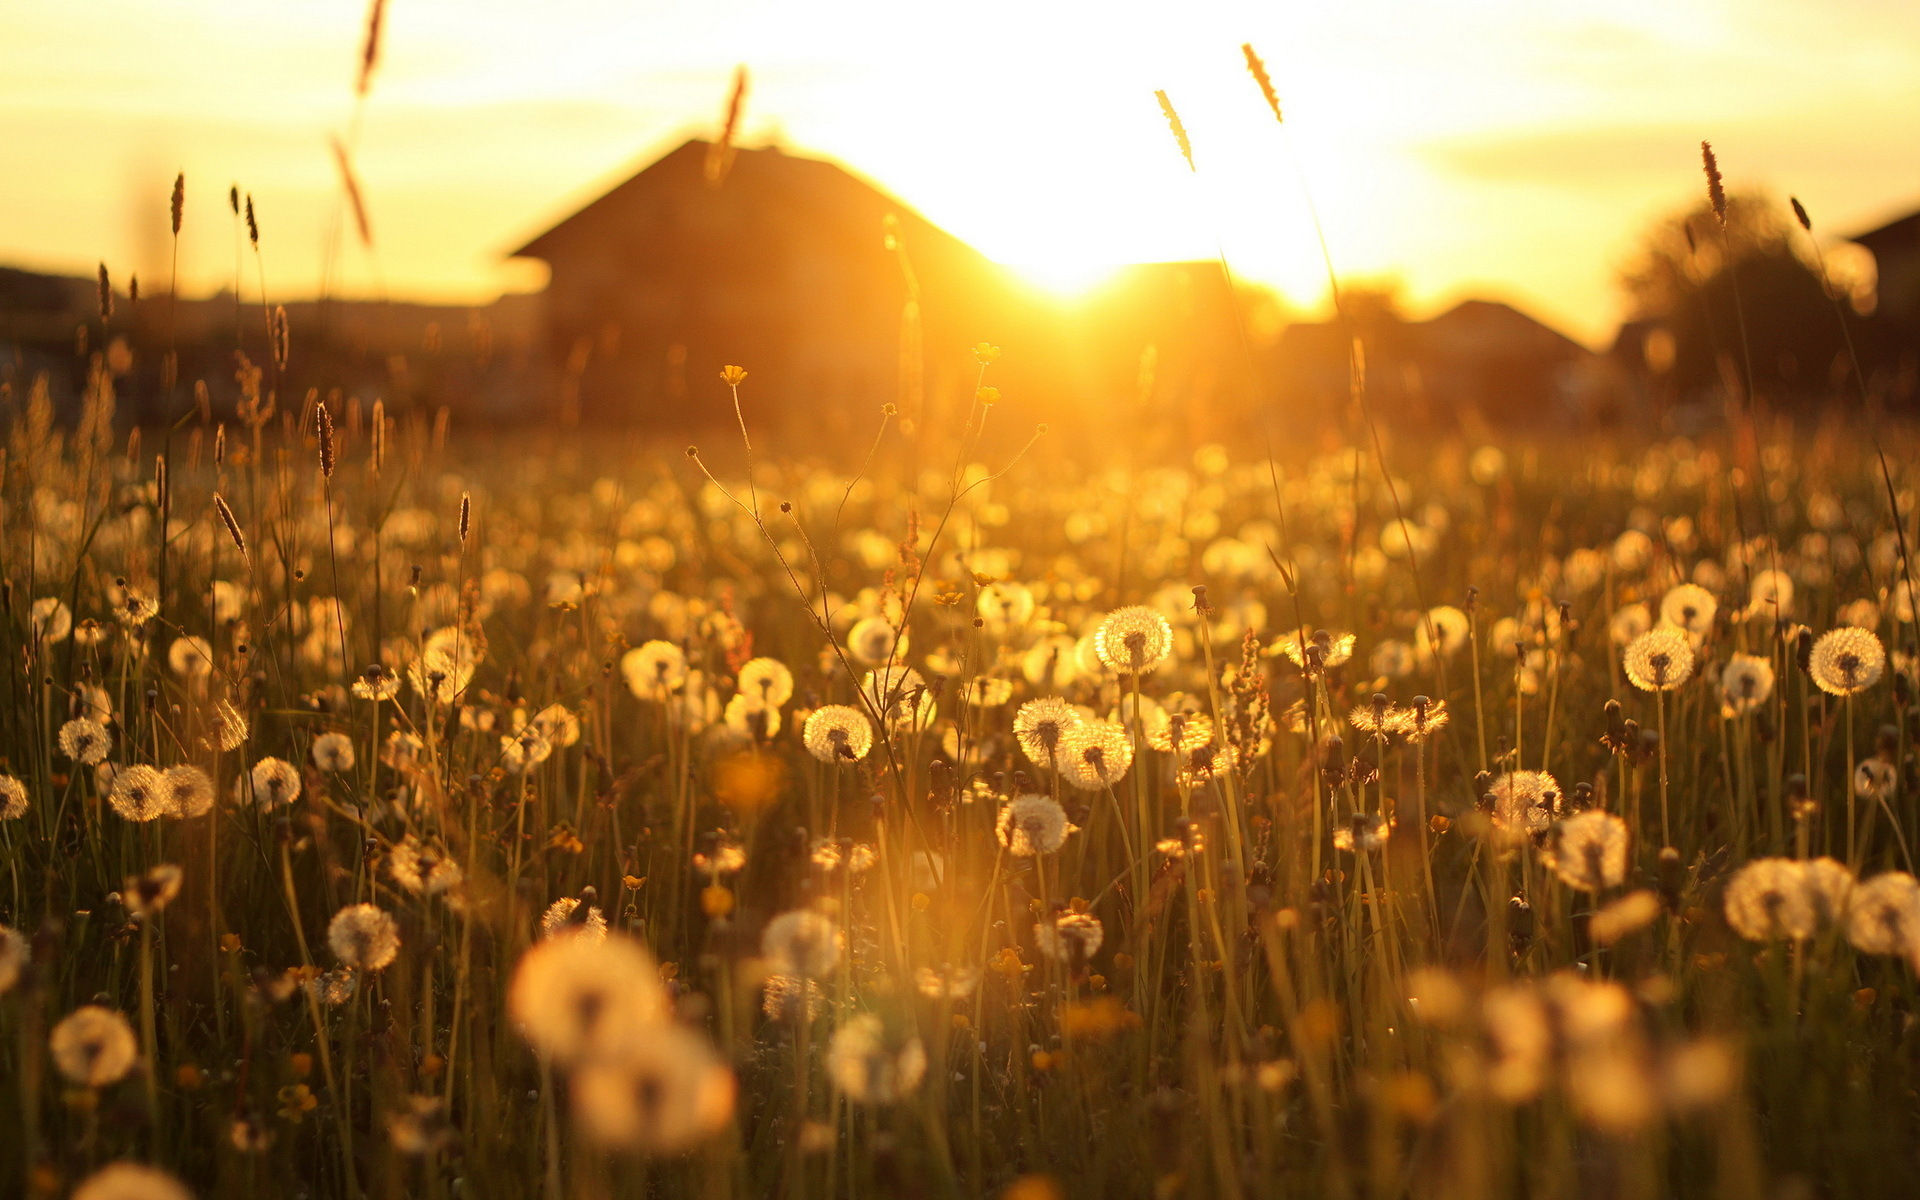 Dante Calathes Dandelion-Field-Sunset-beautiful-images-free-download-fabulous-hd-wallpapers-of-sunset